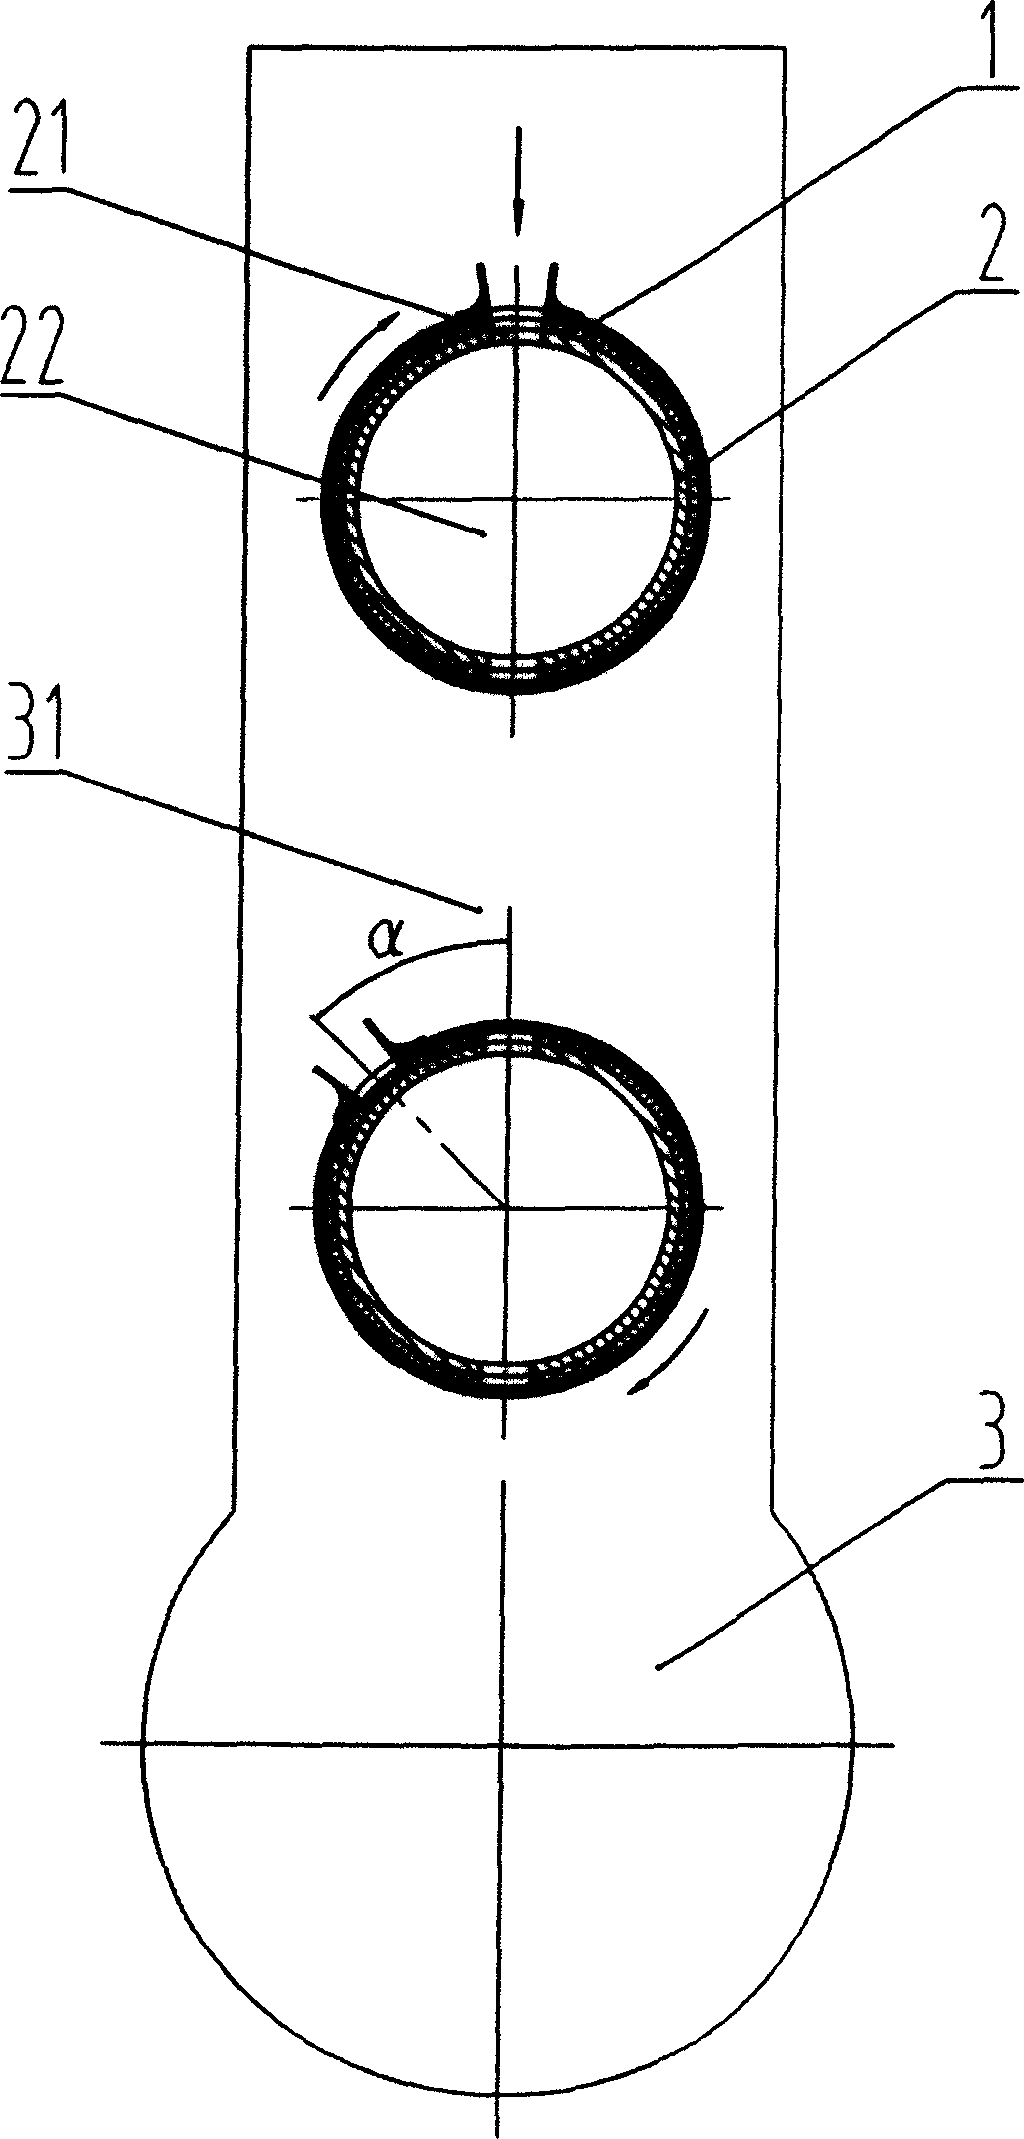 Rotational dust suction mechanism for dust filter